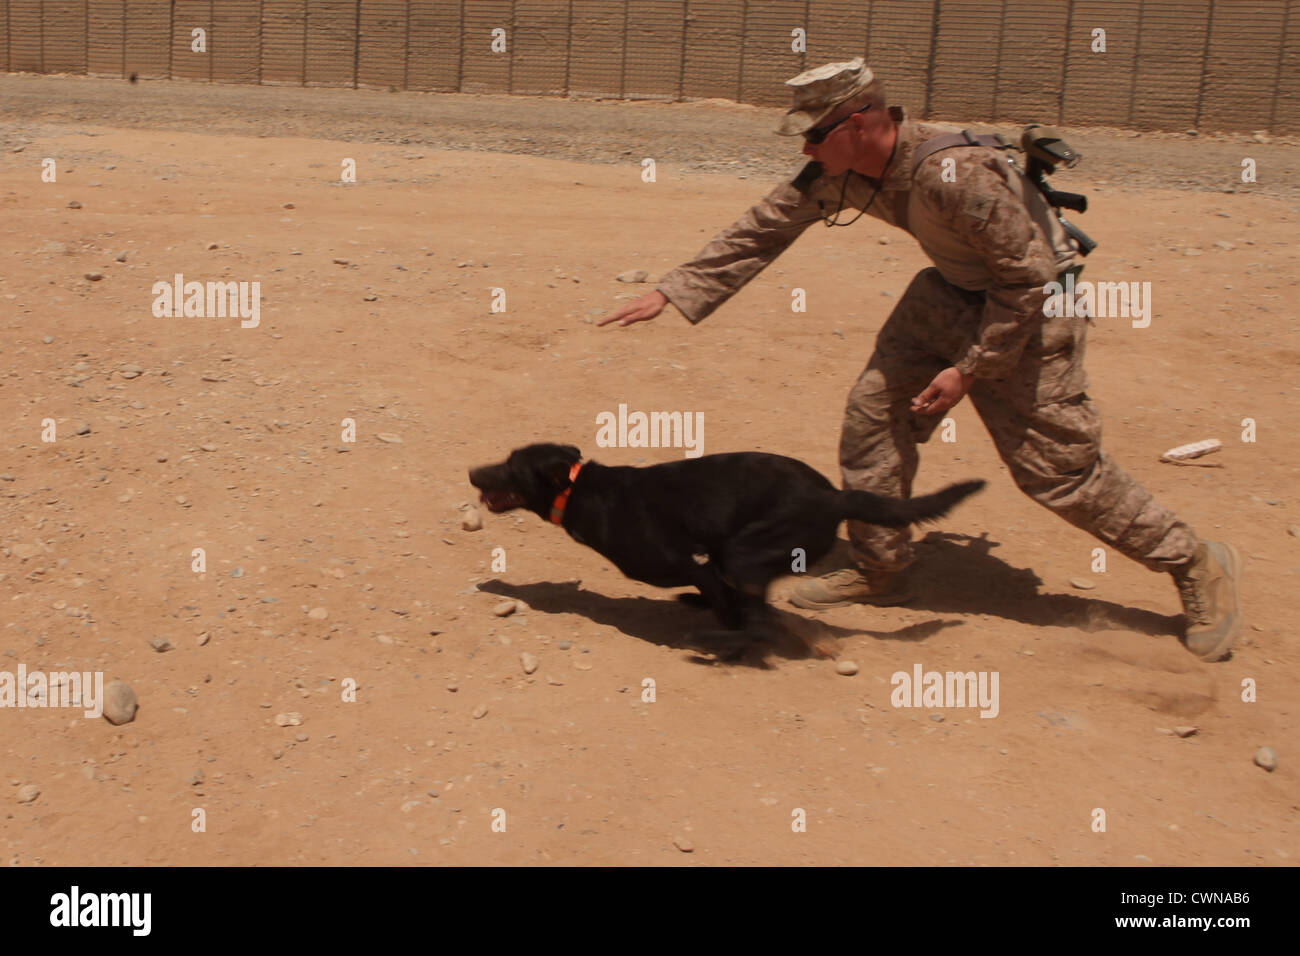 US Marine dog handler signals his dog to scout out imitation explosives at Forward Operating Base Geronimo in Helmand province August 16, 2012 in Afghanistan. The handlers conducted the training to sharpen the skills of their dogs in locating improvised explosive devices on the battlefield. Stock Photo